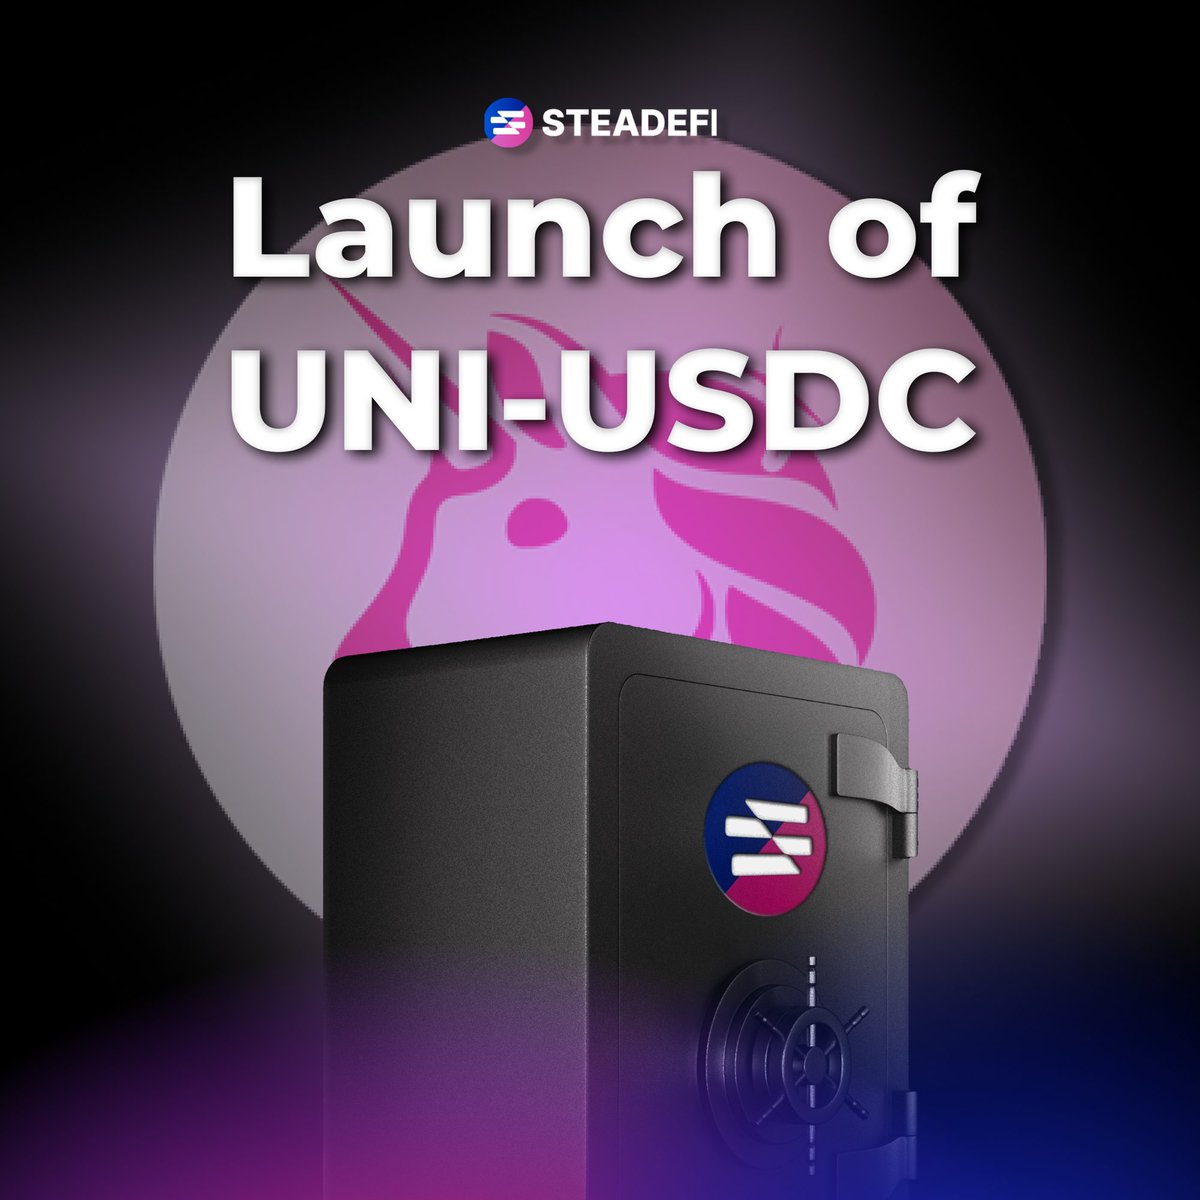 GM Steady Lads! 🌟 UNI-USDC GMX Vaults are now live on Steadefi! Get set to claim your profits with an APR of over 110%! 💸 Shoutout to the amazing @Uniswap and @GMX_IO team!